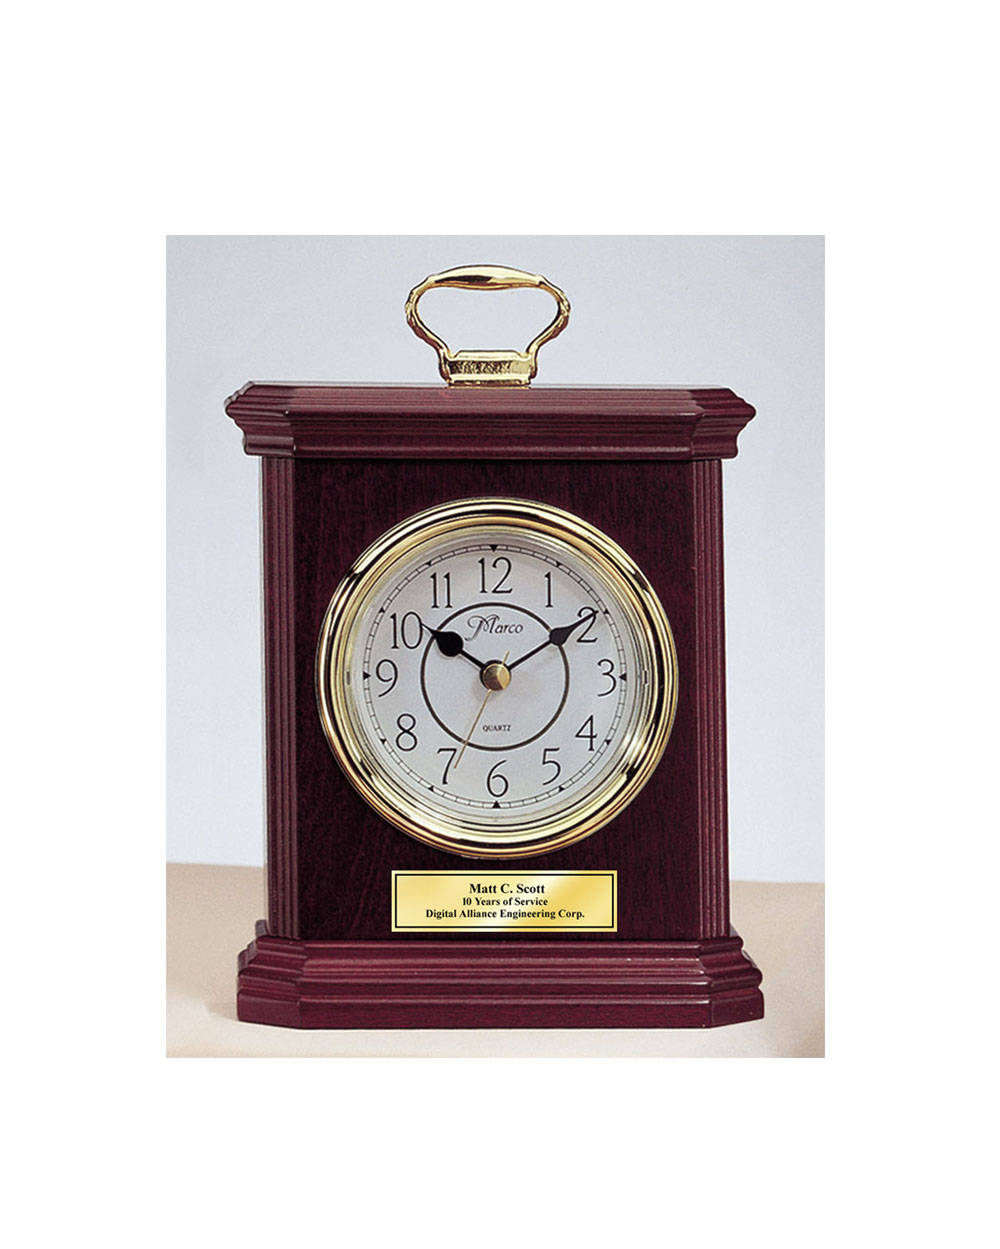 Engraved Wood Desk Clock Carriage Gold Handle With Gold Engraving Plat